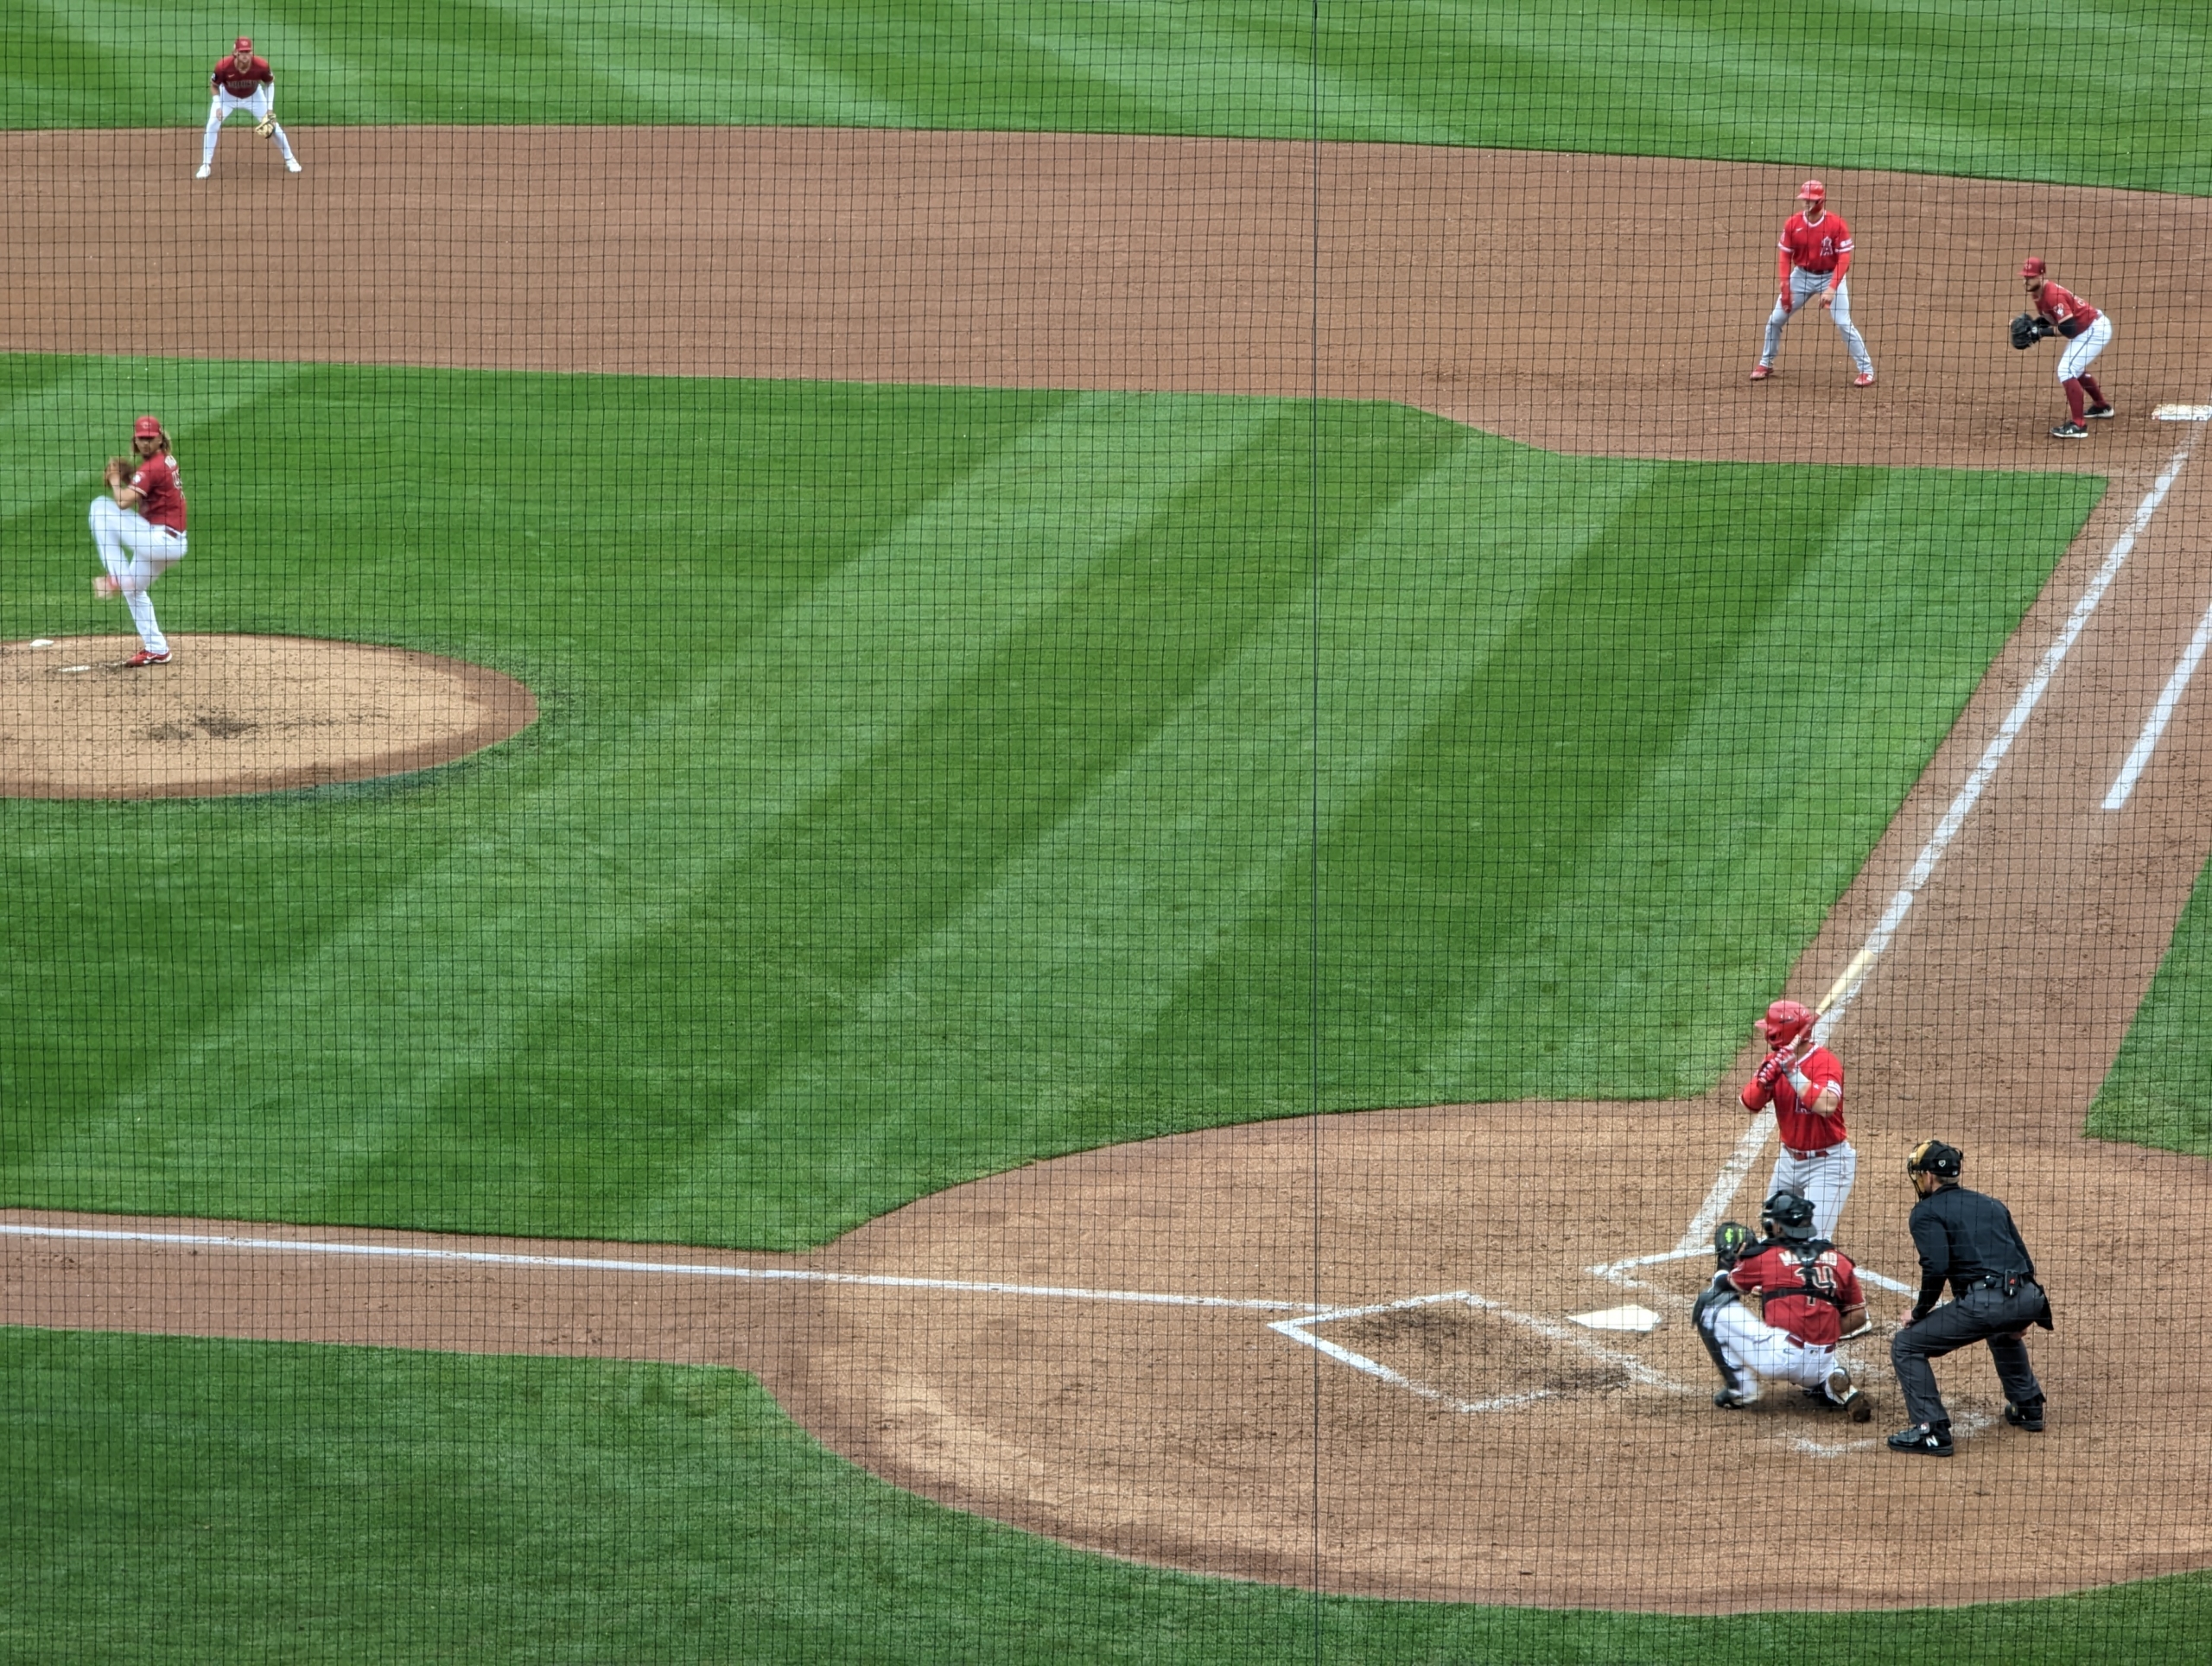 Carlos Vargas throwing a pitch for the Diamondbacks against the Angels.